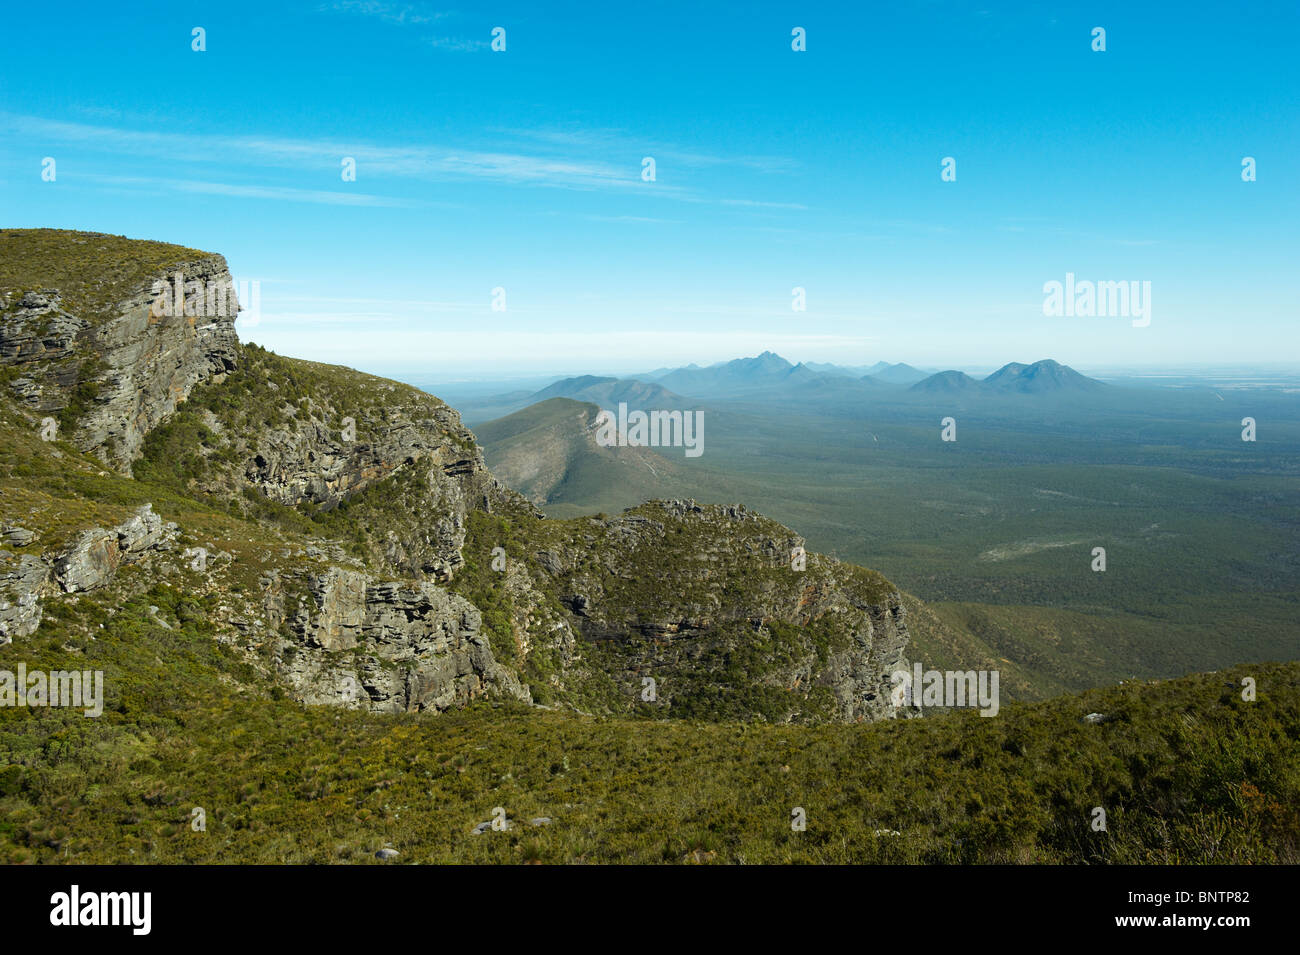 Australia, Western Australia, Stirling Range NP, Toolbrunup & Mt Trio from slopes of Bluff Knoll. Stock Photo